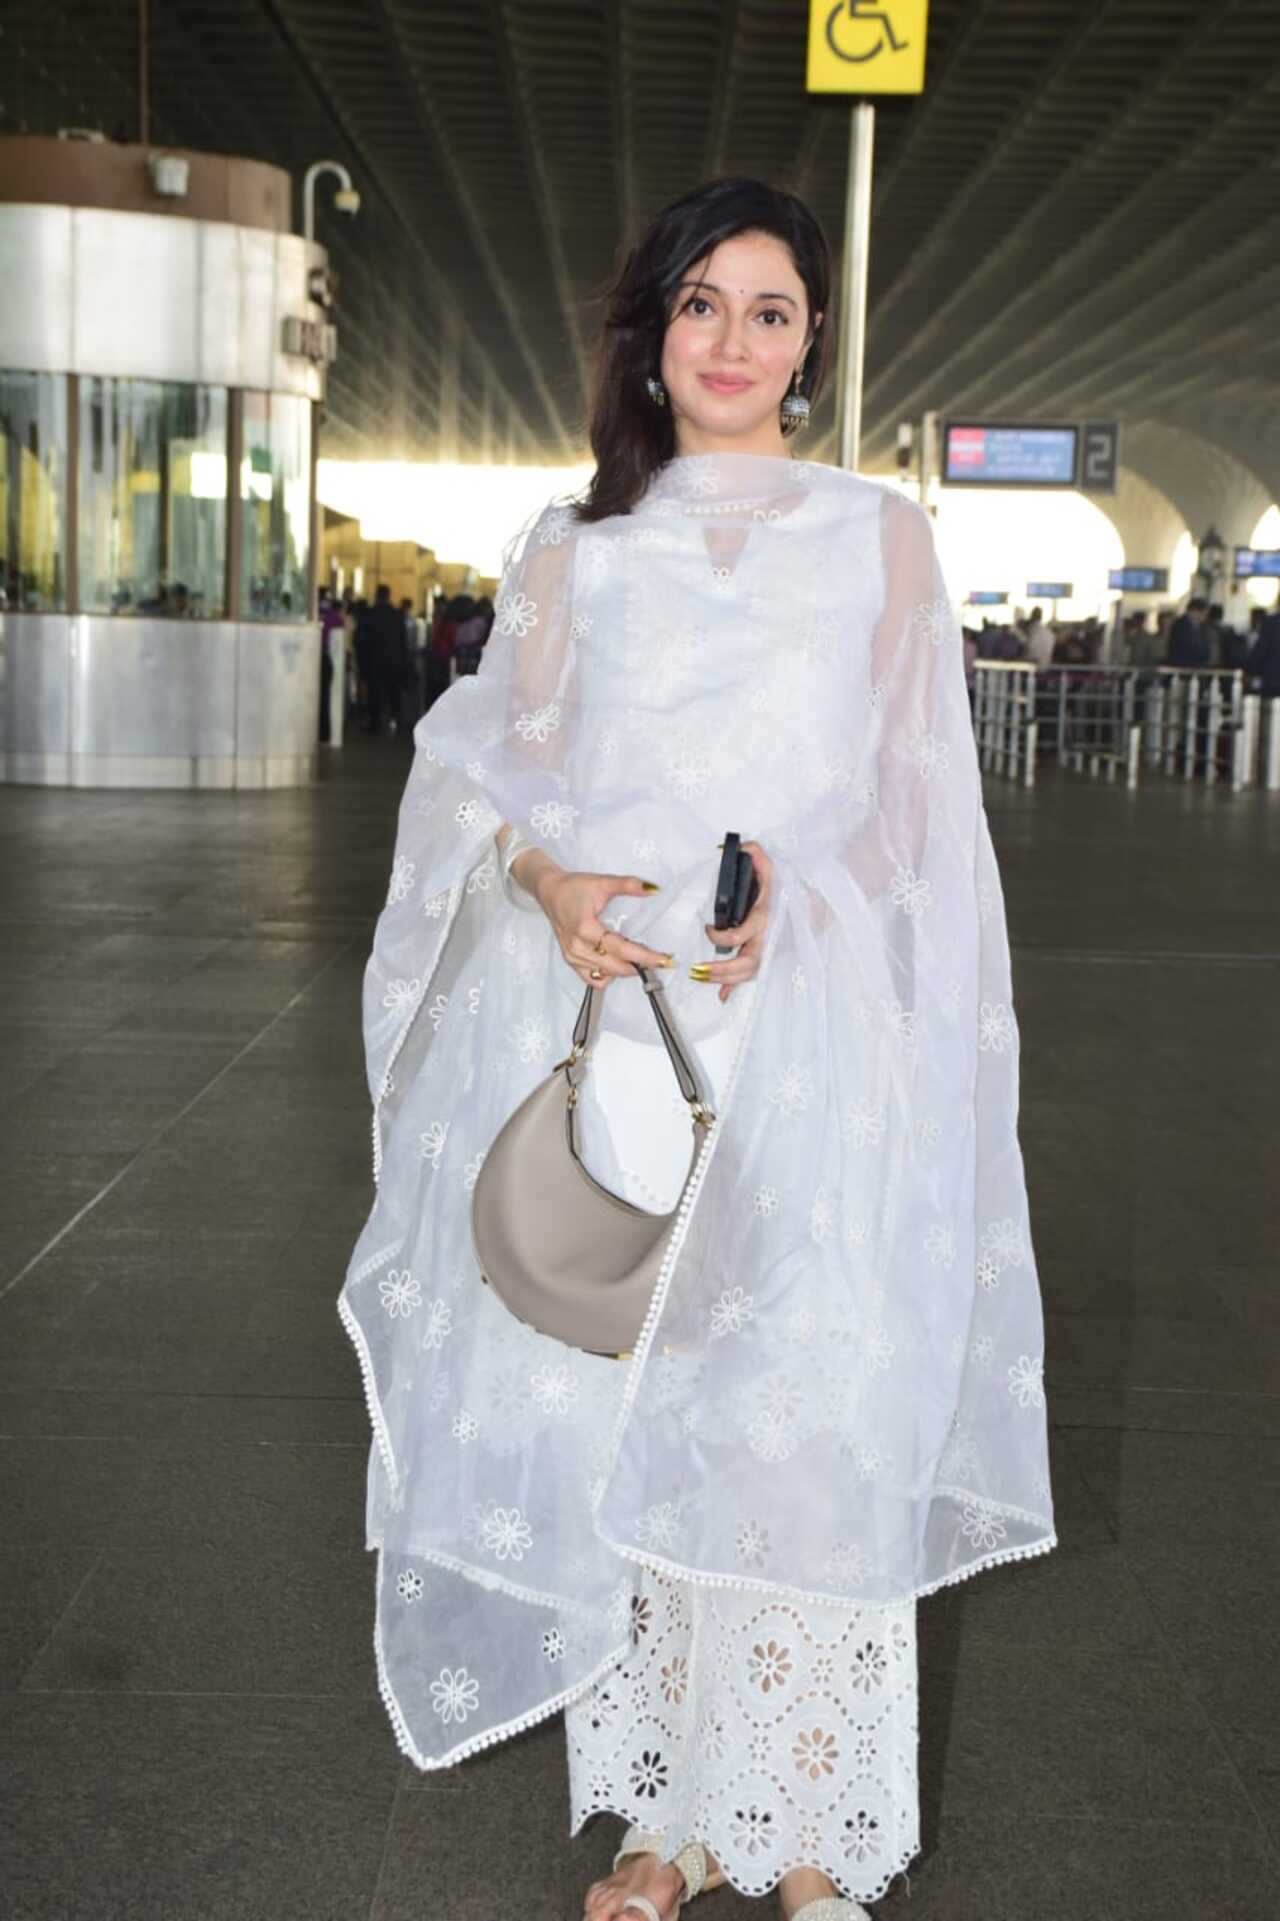 Divya Khossla Kumar was spotted at the airport in a white suit